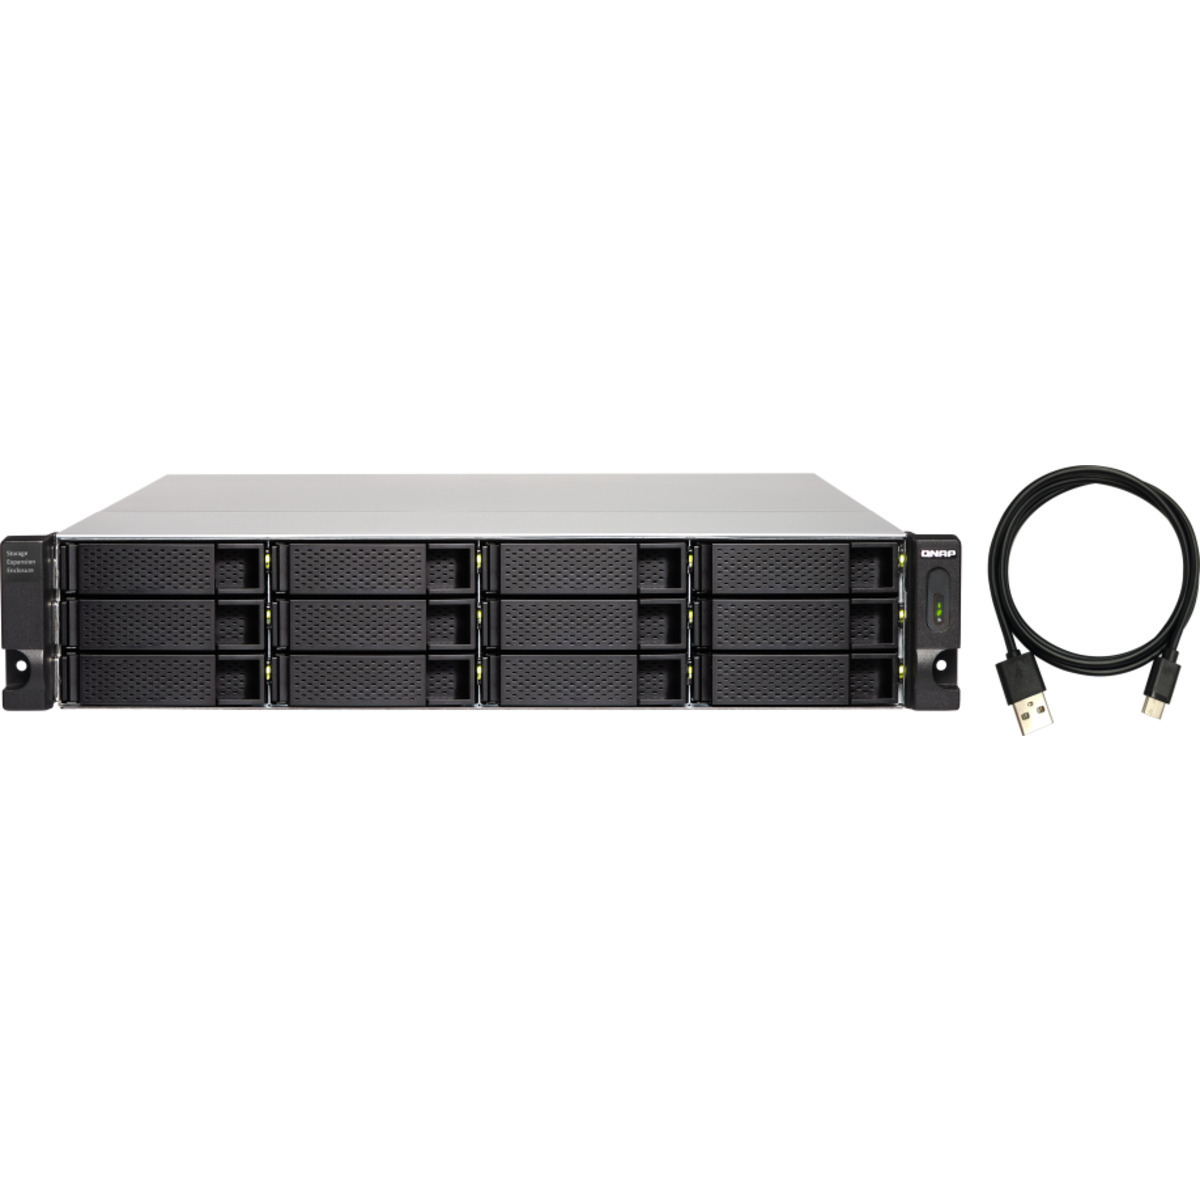 buy $7104 QNAP TL-R1200C-RP External Expansion Drive 240tb RackMount Expansion Enclosure 12x20000gb Western Digital Red Pro WD201KFGX 3.5 7200rpm SATA 6Gb/s HDD NAS Class Drives Installed - Burn-In Tested - nas headquarters buy network attached storage server device das new raid-5 free shipping simply usa TL-R1200C-RP External Expansion Drive